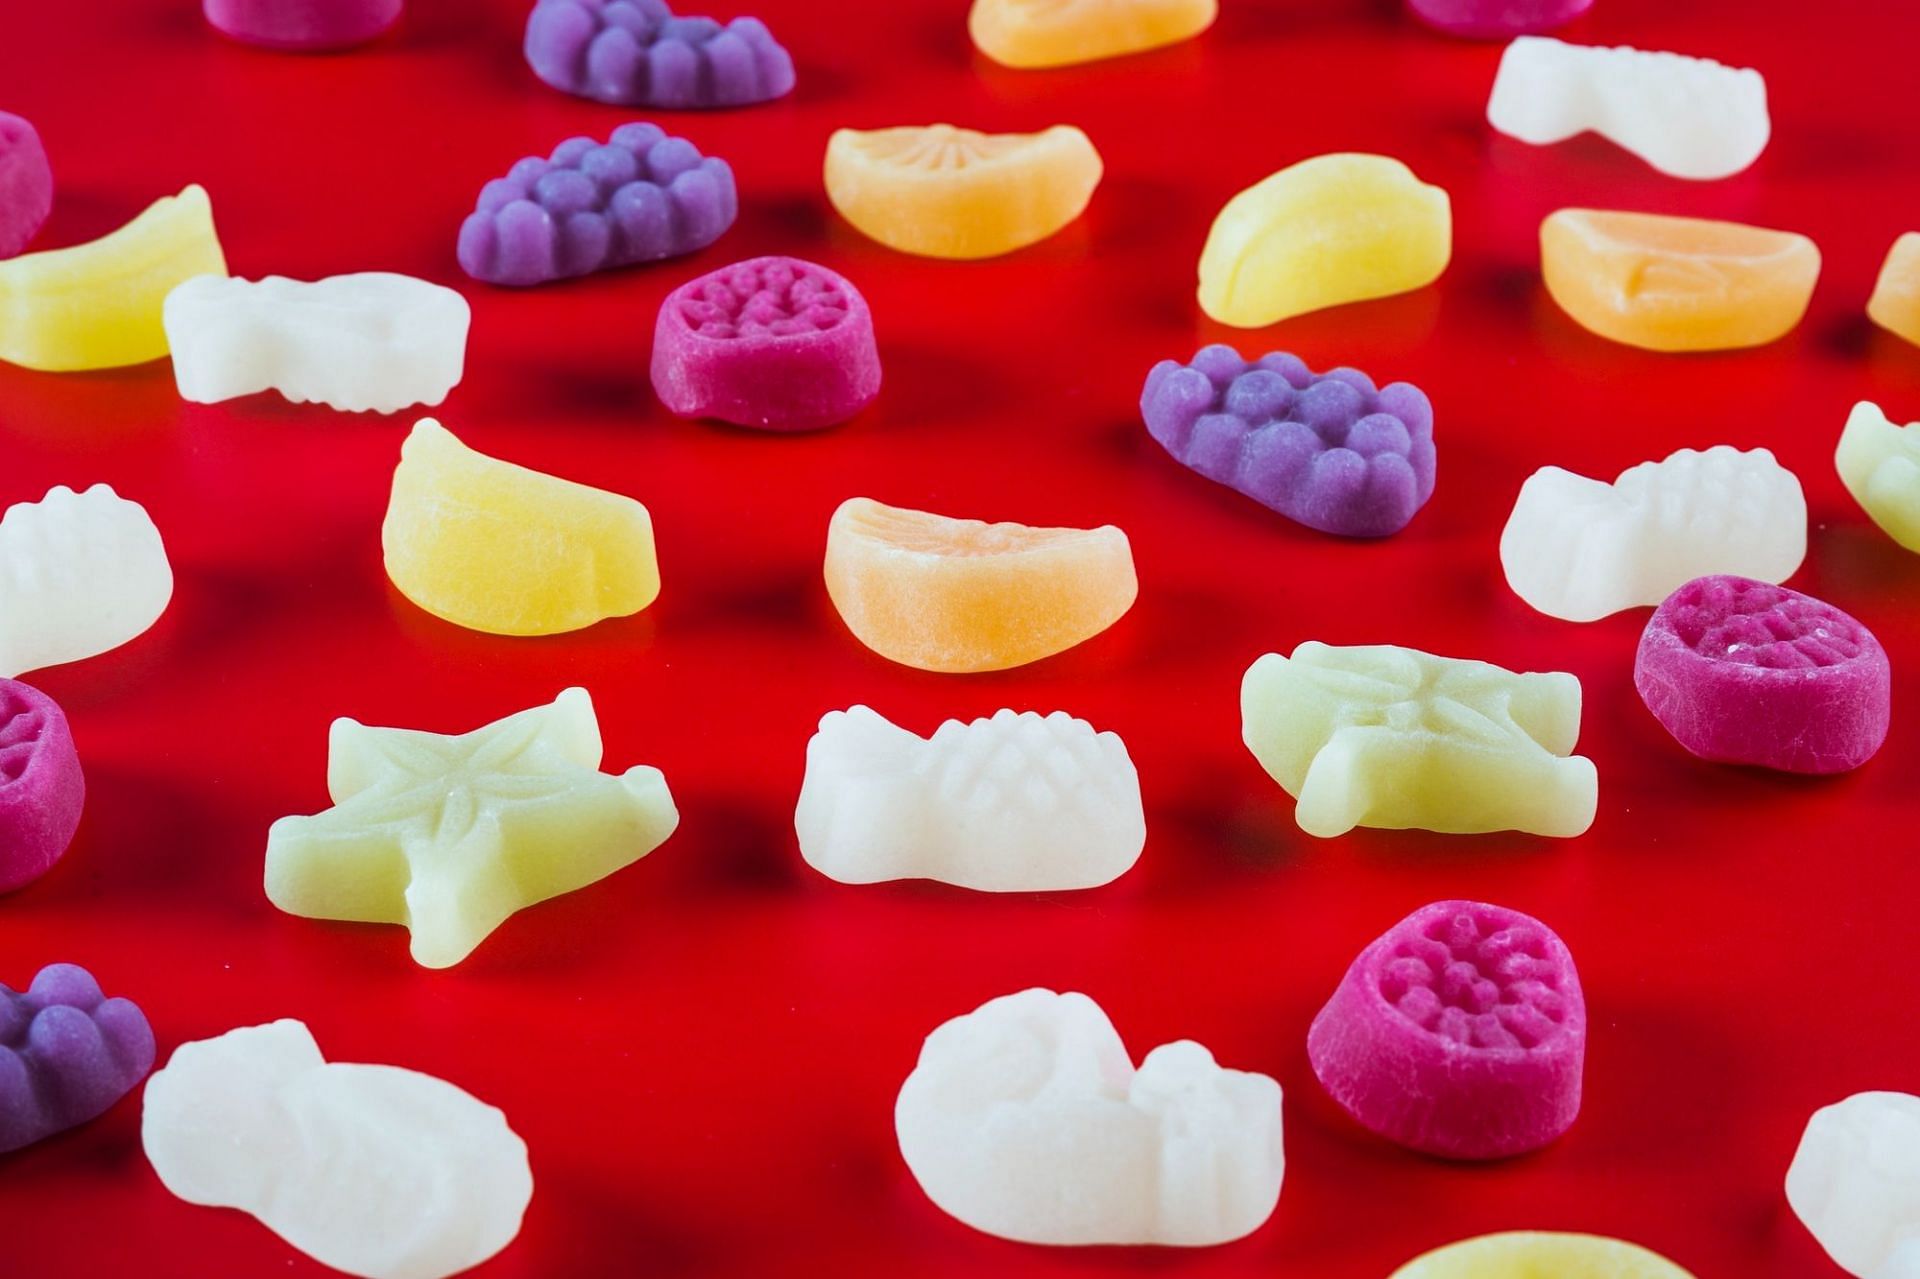 What are these gummies, and how do they look and taste? (Image by Freepik)